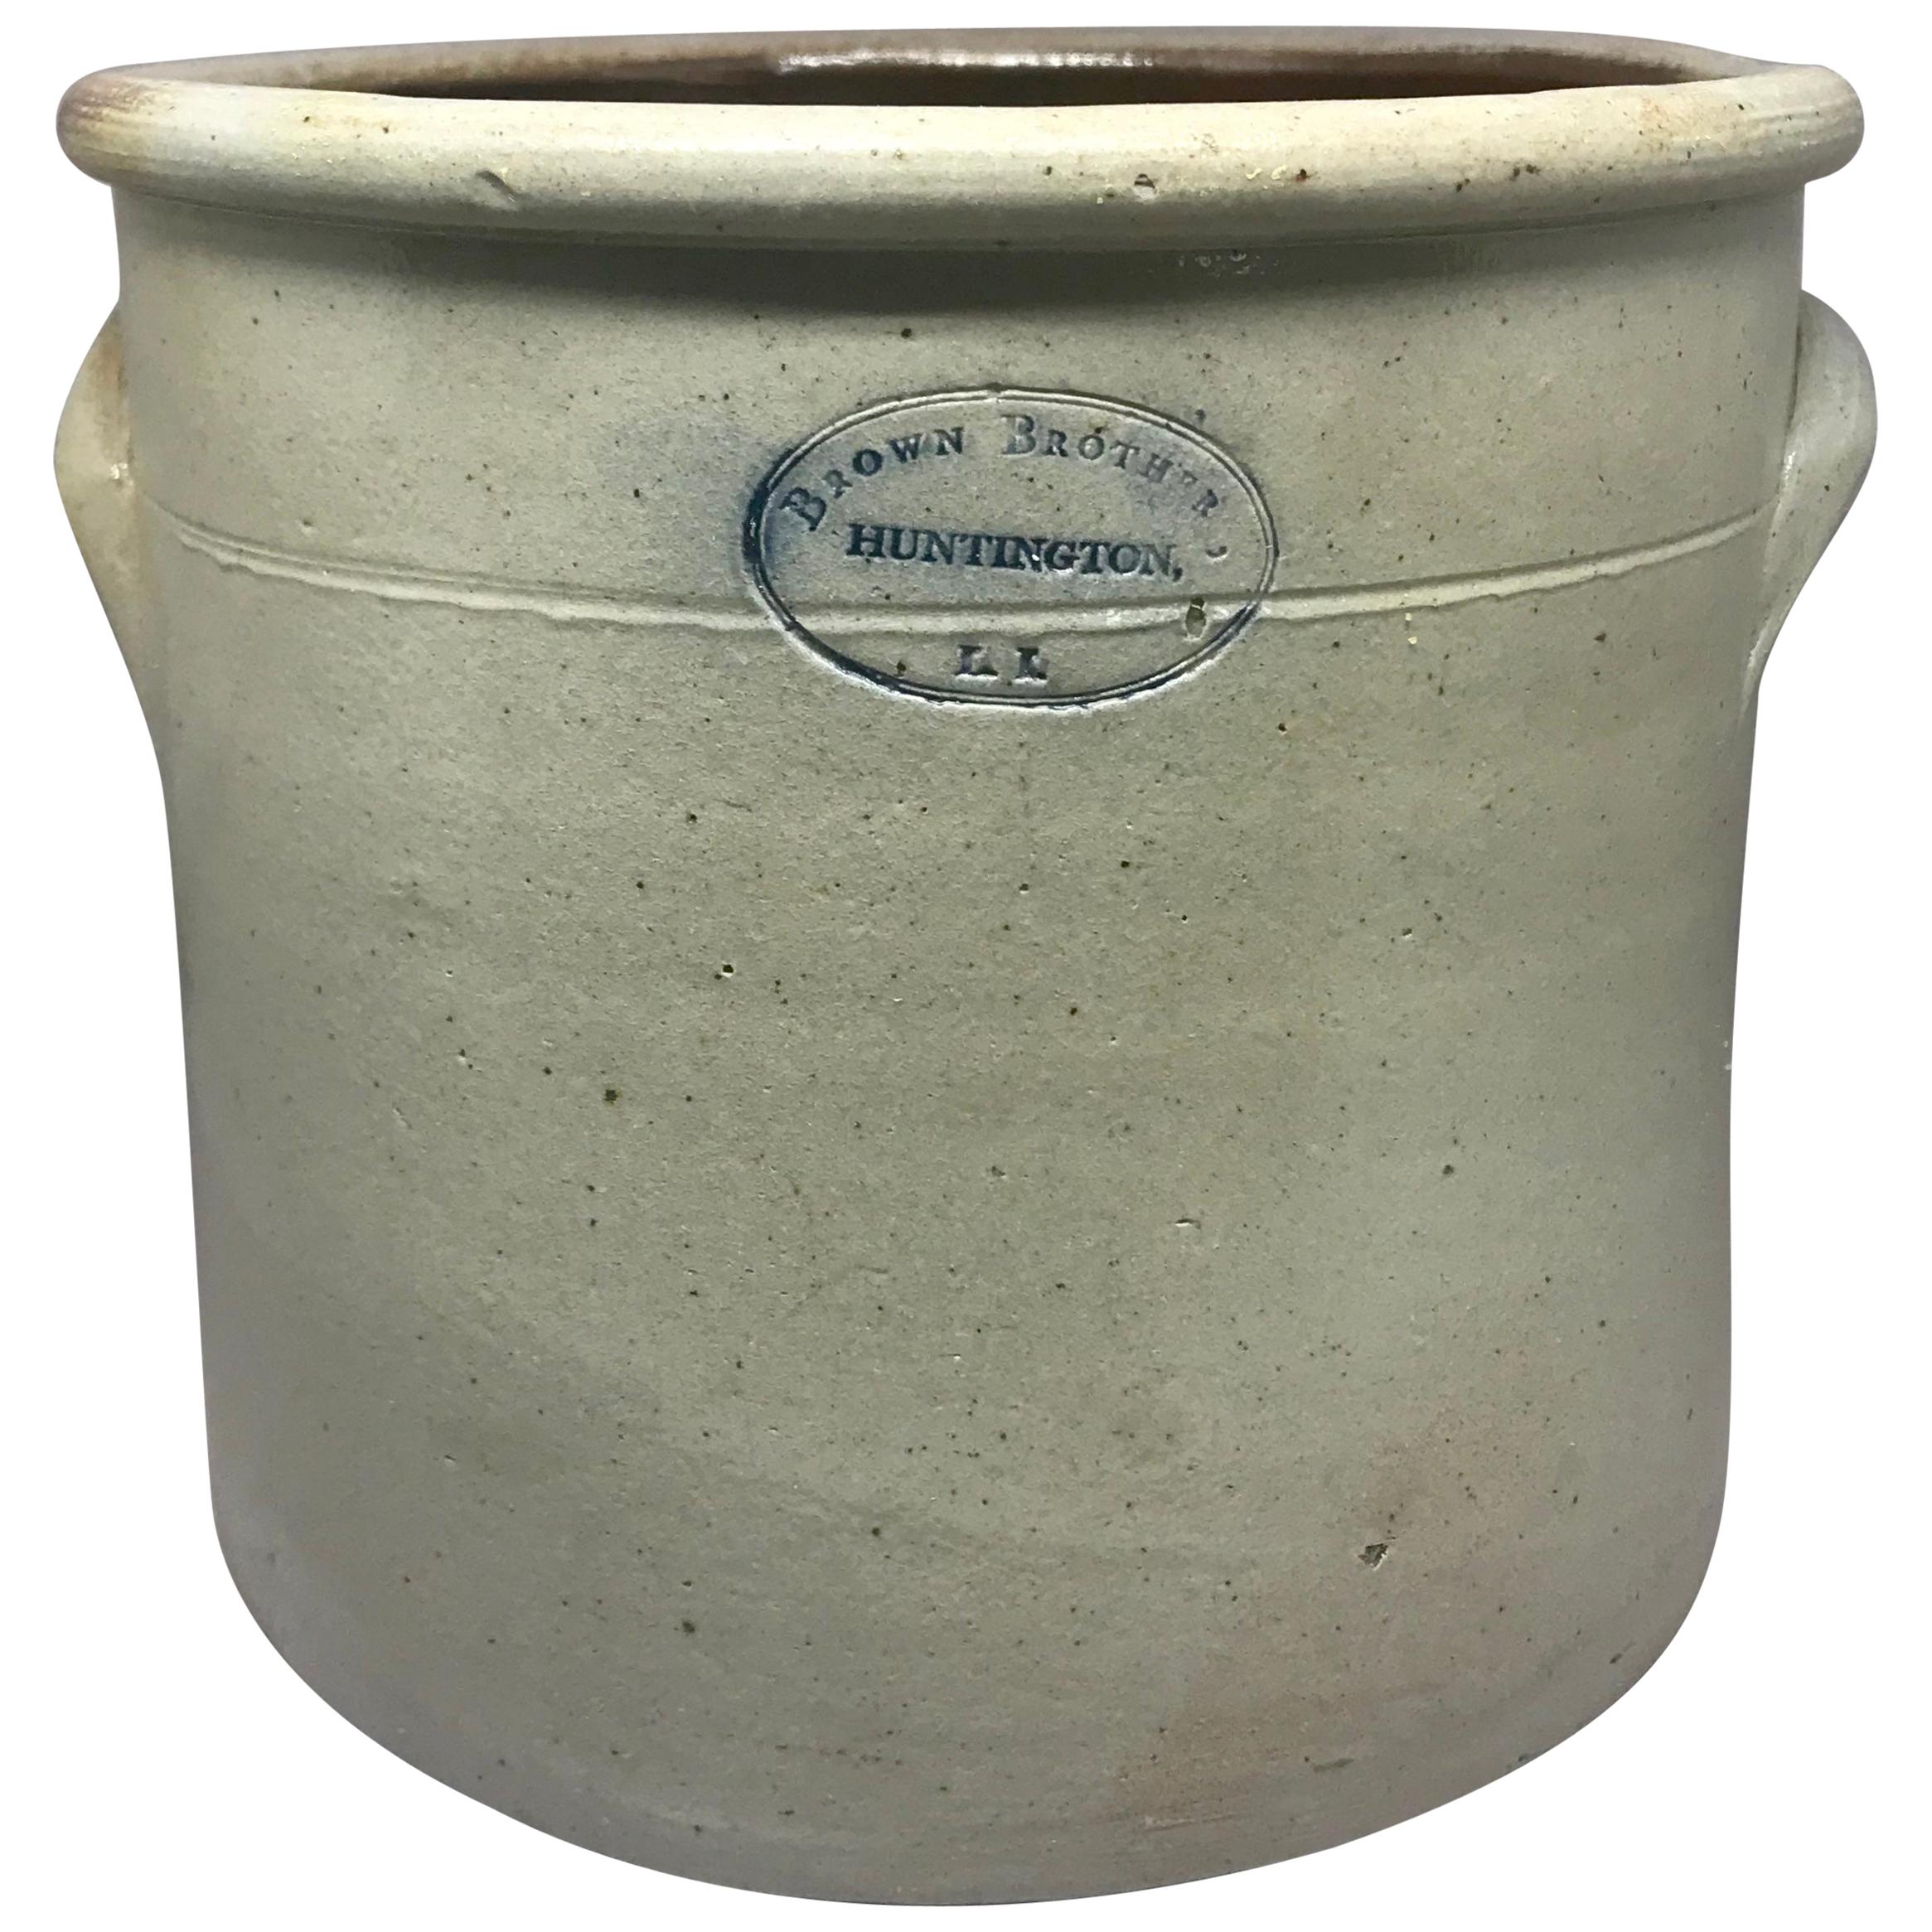 Brown Brothers Stroneware Crock